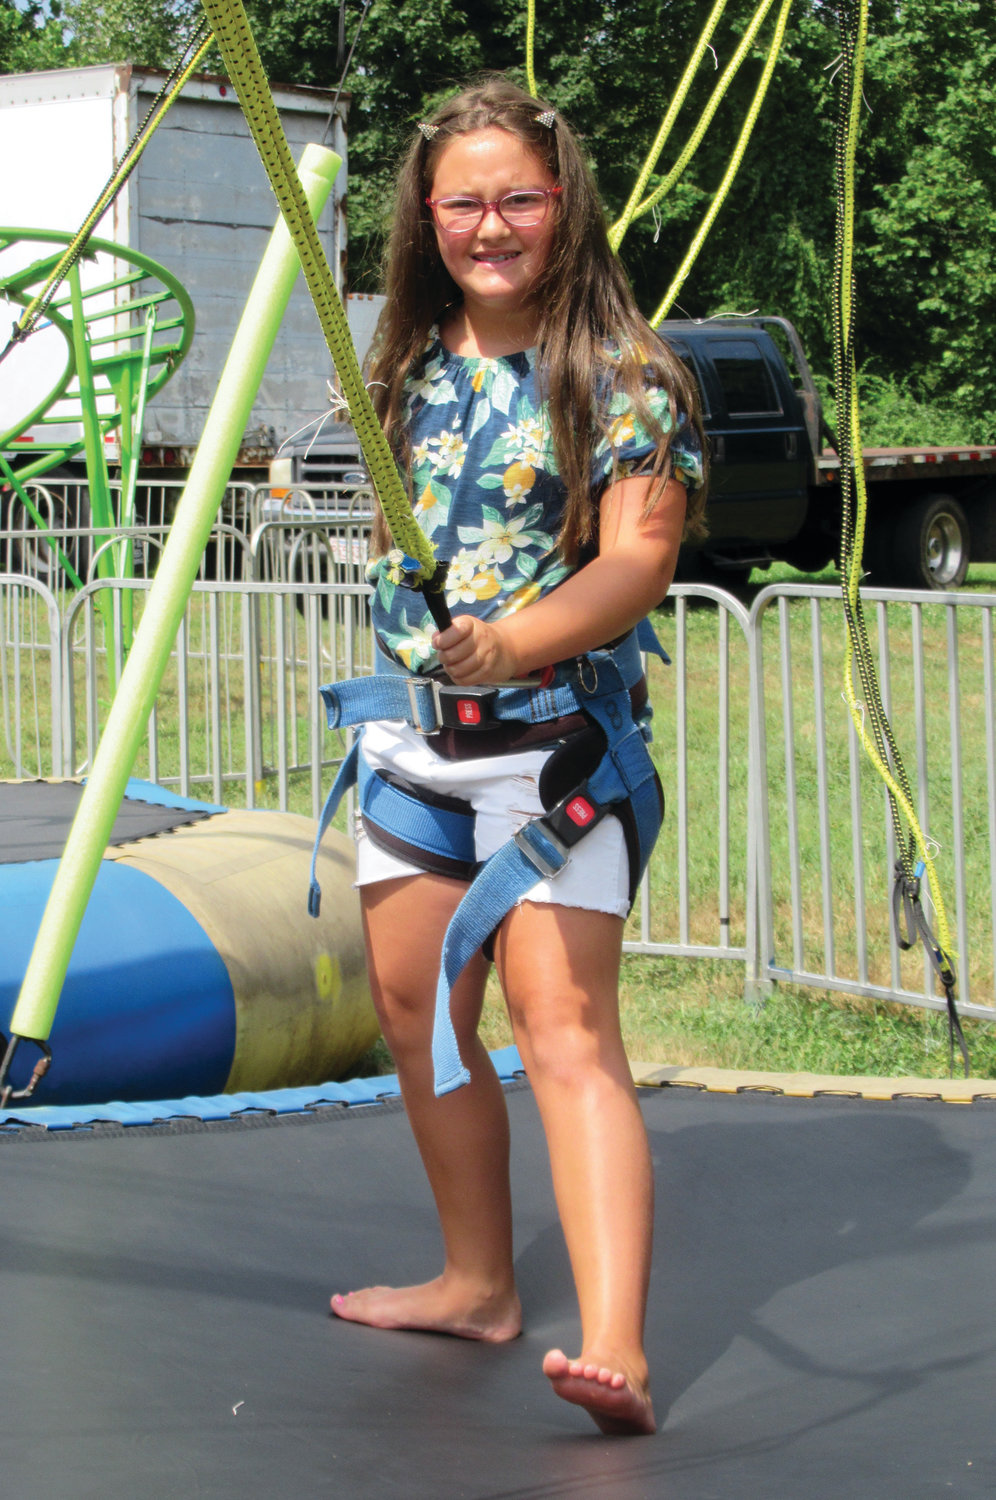 FUN AND GAMES: Gia Vescera, 8, gets set to test her mettle on the bungee cord during Sunday's visit to the Saint Rocco's Festival